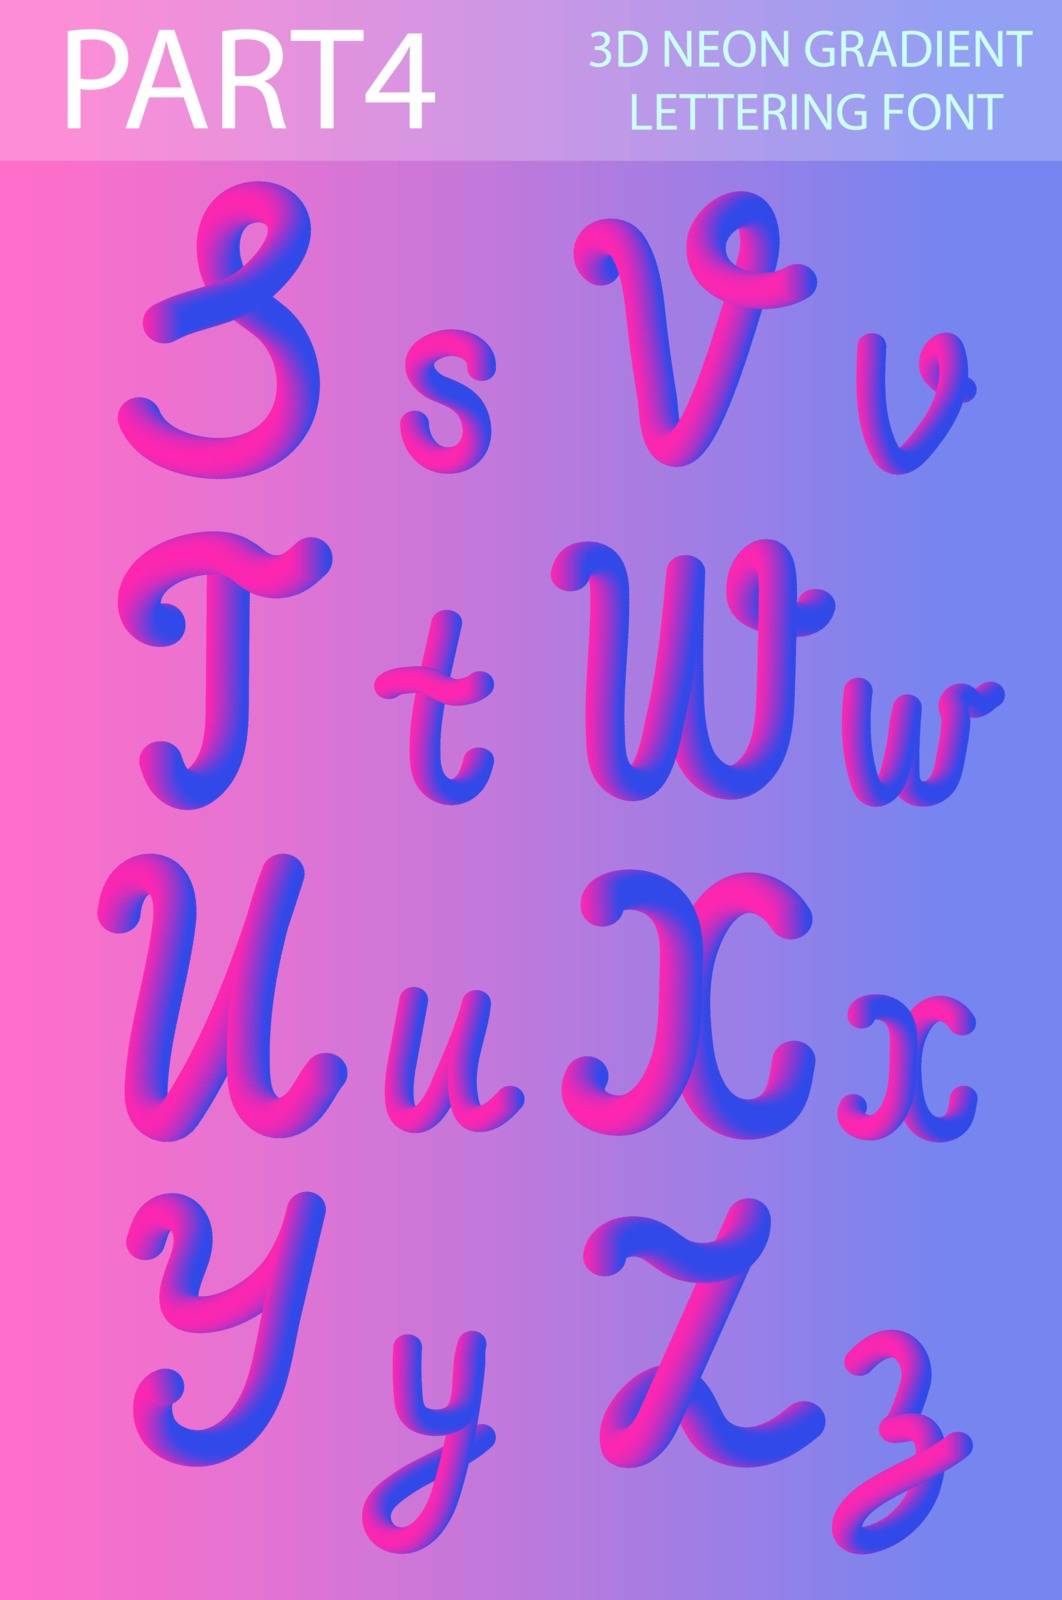 Neon 3D Typeset with Rounded Shapes. Tube Hand-Drawn Lettering. Font Set of Painted Letters. Night Glow Effect or liquid. Trendy alphabet Latin letters from A to Z. Vector illustration. by lucia_fox